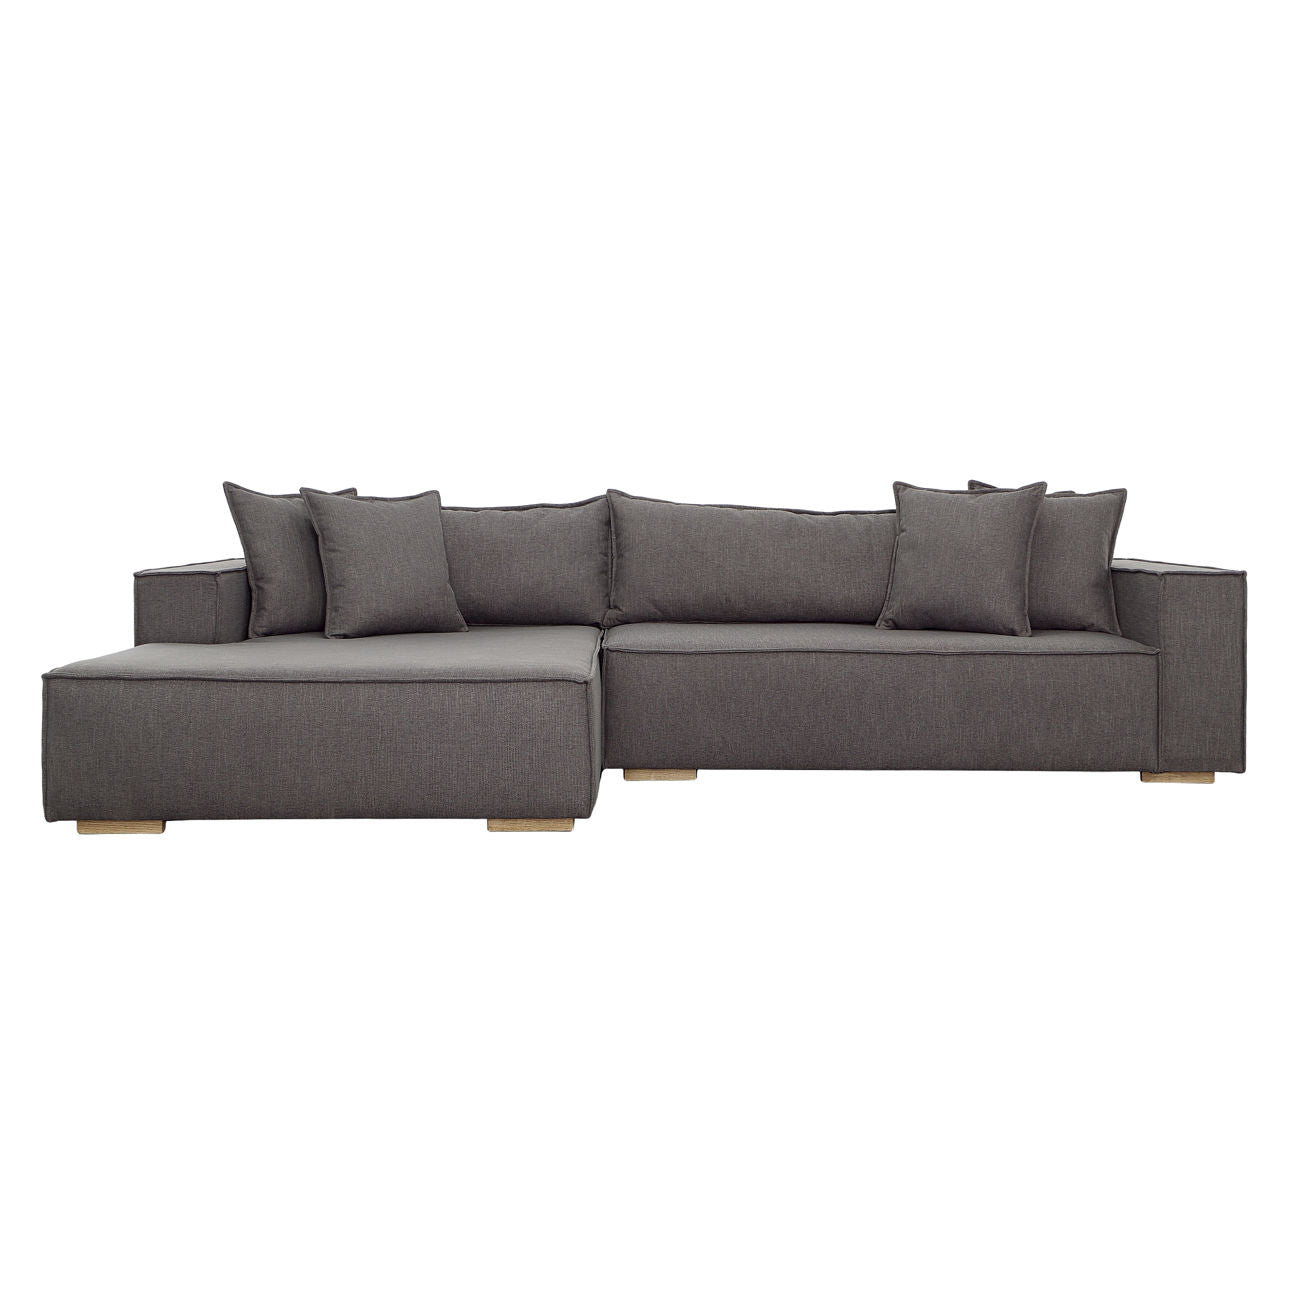 Dovetail Clarisse Chaise Sectional GAS1003R-CHAR-122